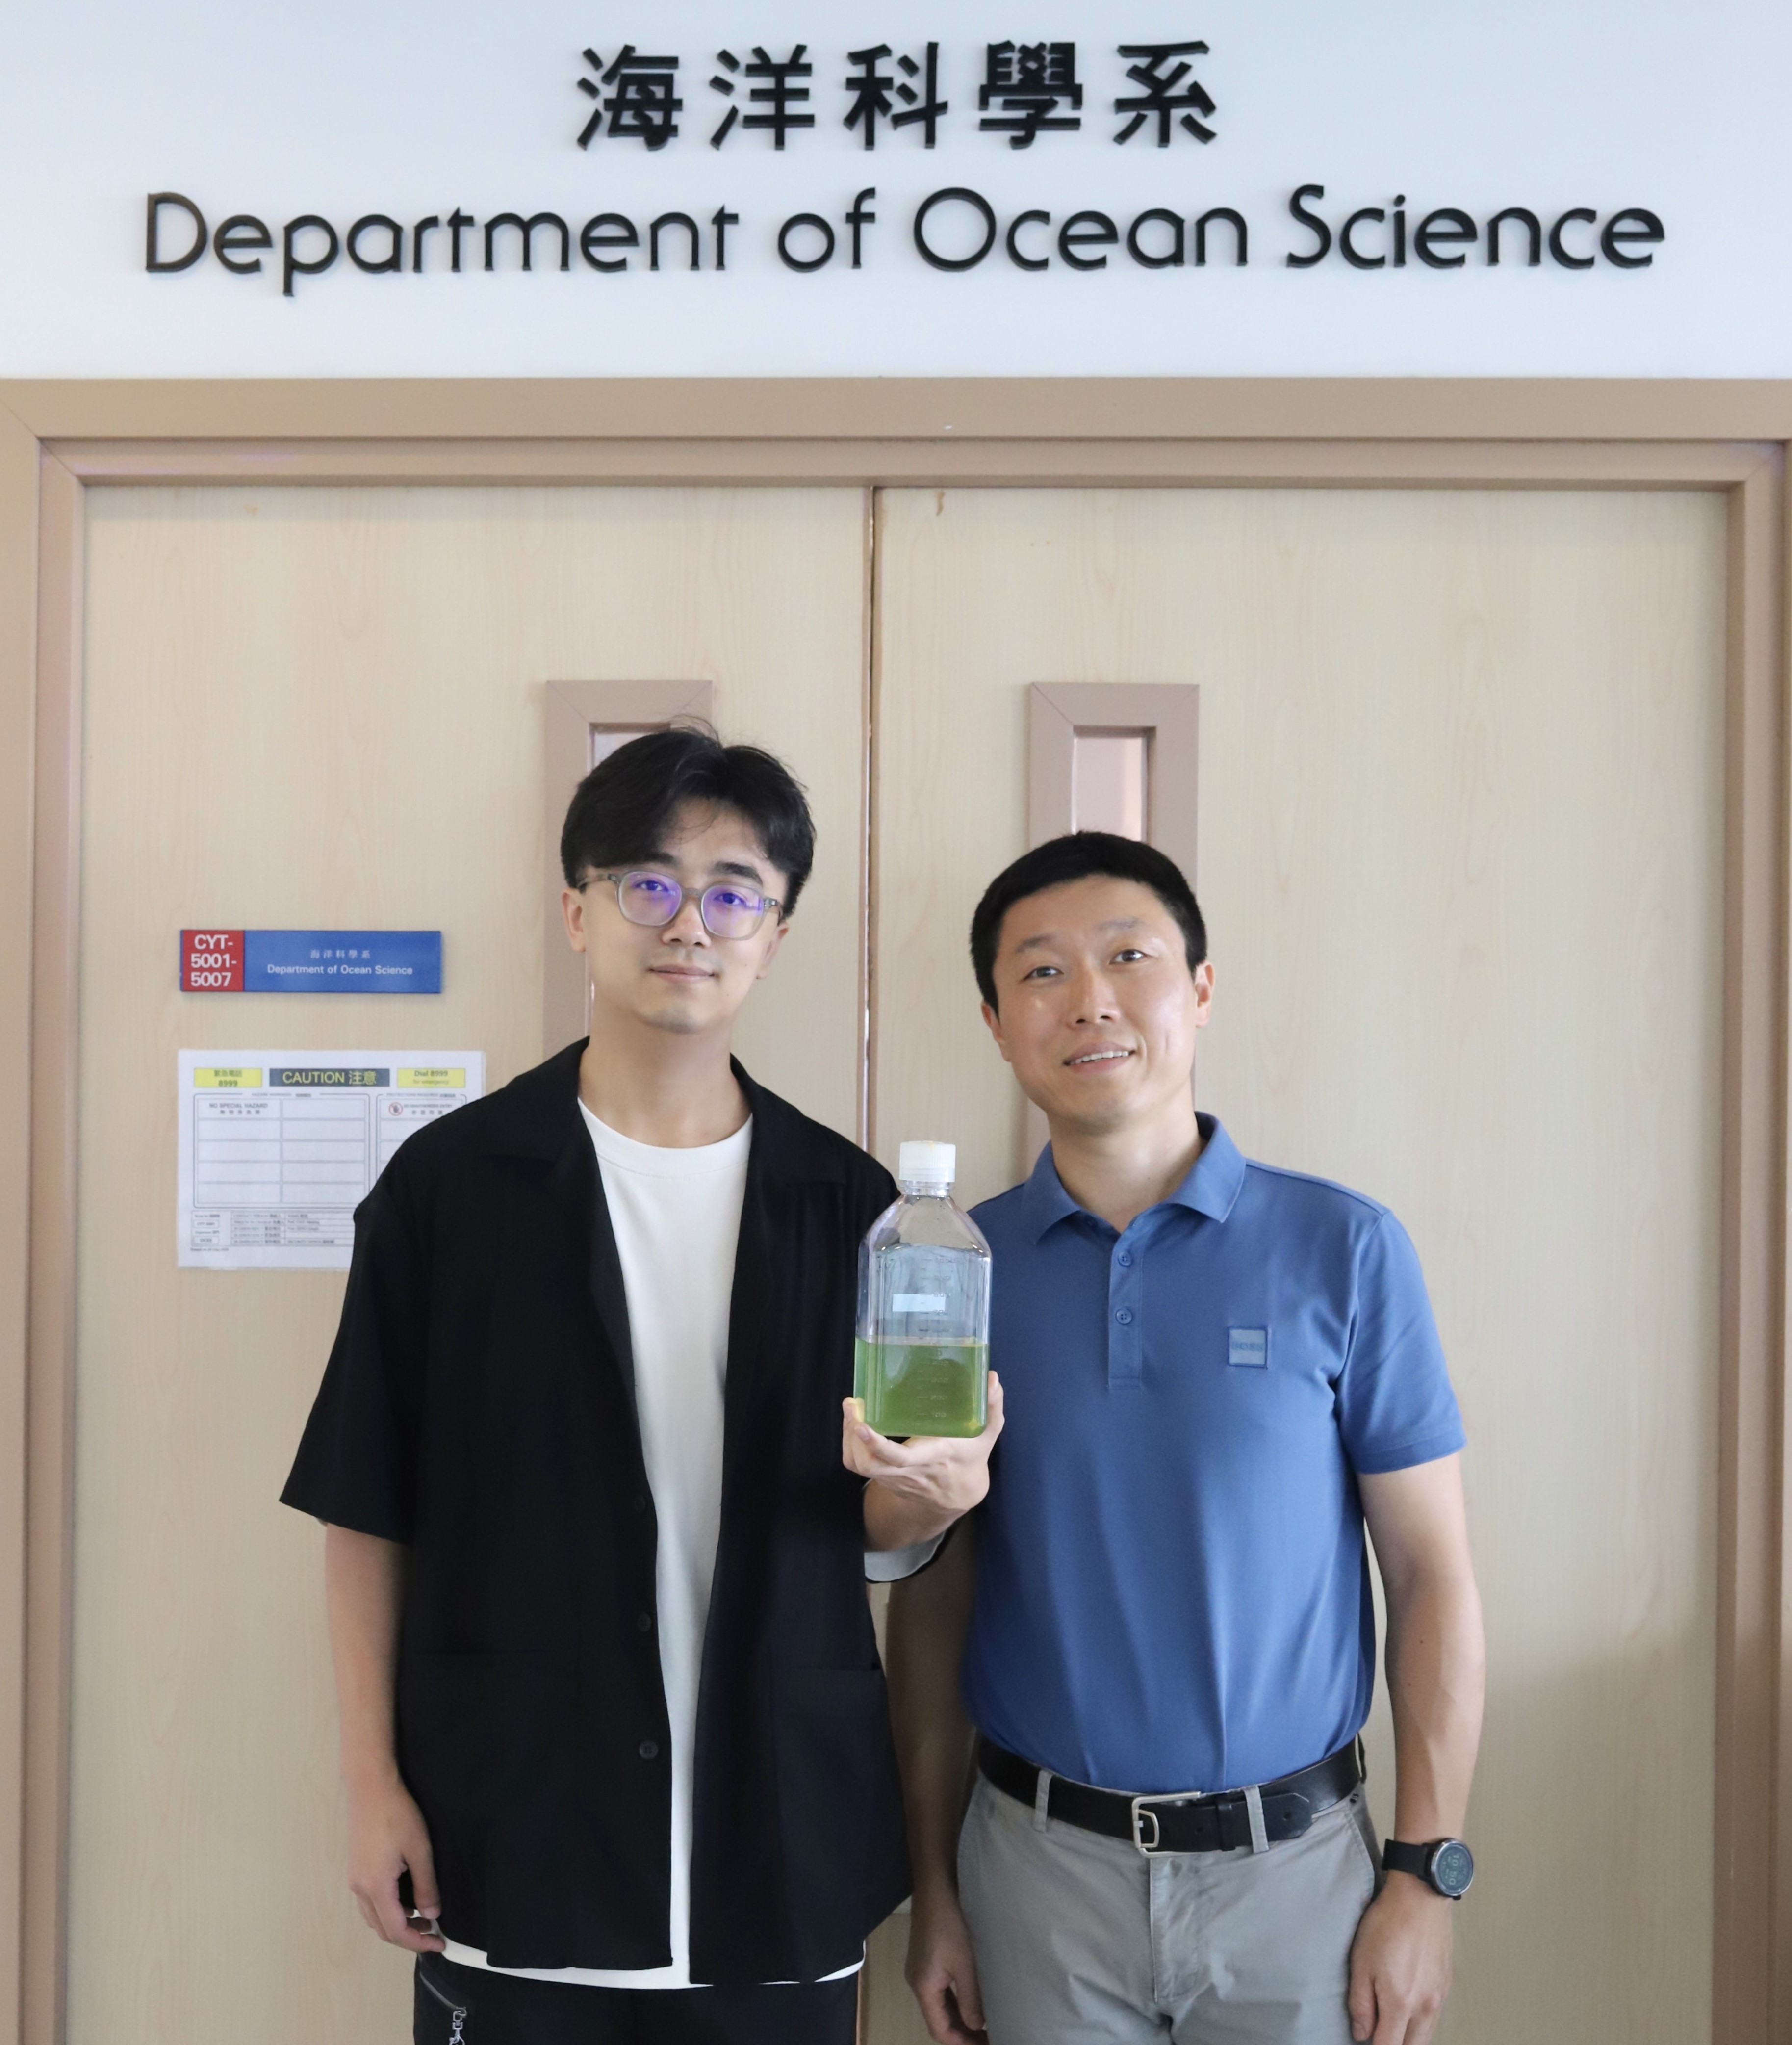 Prof. ZENG Qinglu(right) and one of the research paper author Mr LI Haofu (left), PhD student in Department of Ocean Science, showing the sample of Prochlorococcus MED4 culture